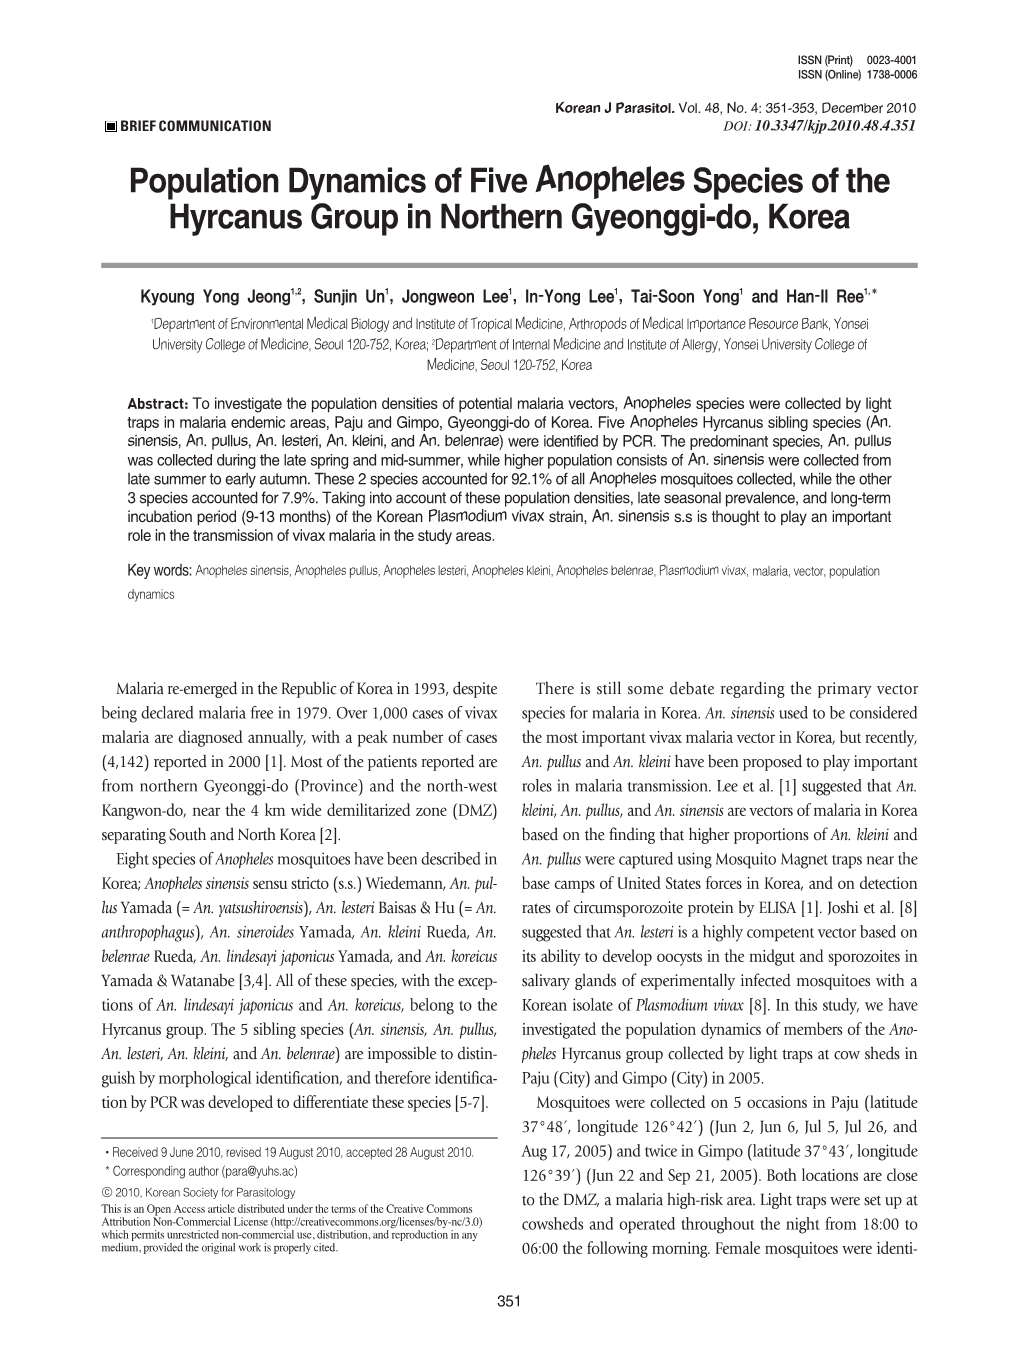 Population Dynamics of Five Anopheles Species of the Hyrcanus Group in Northern Gyeonggi-Do, Korea